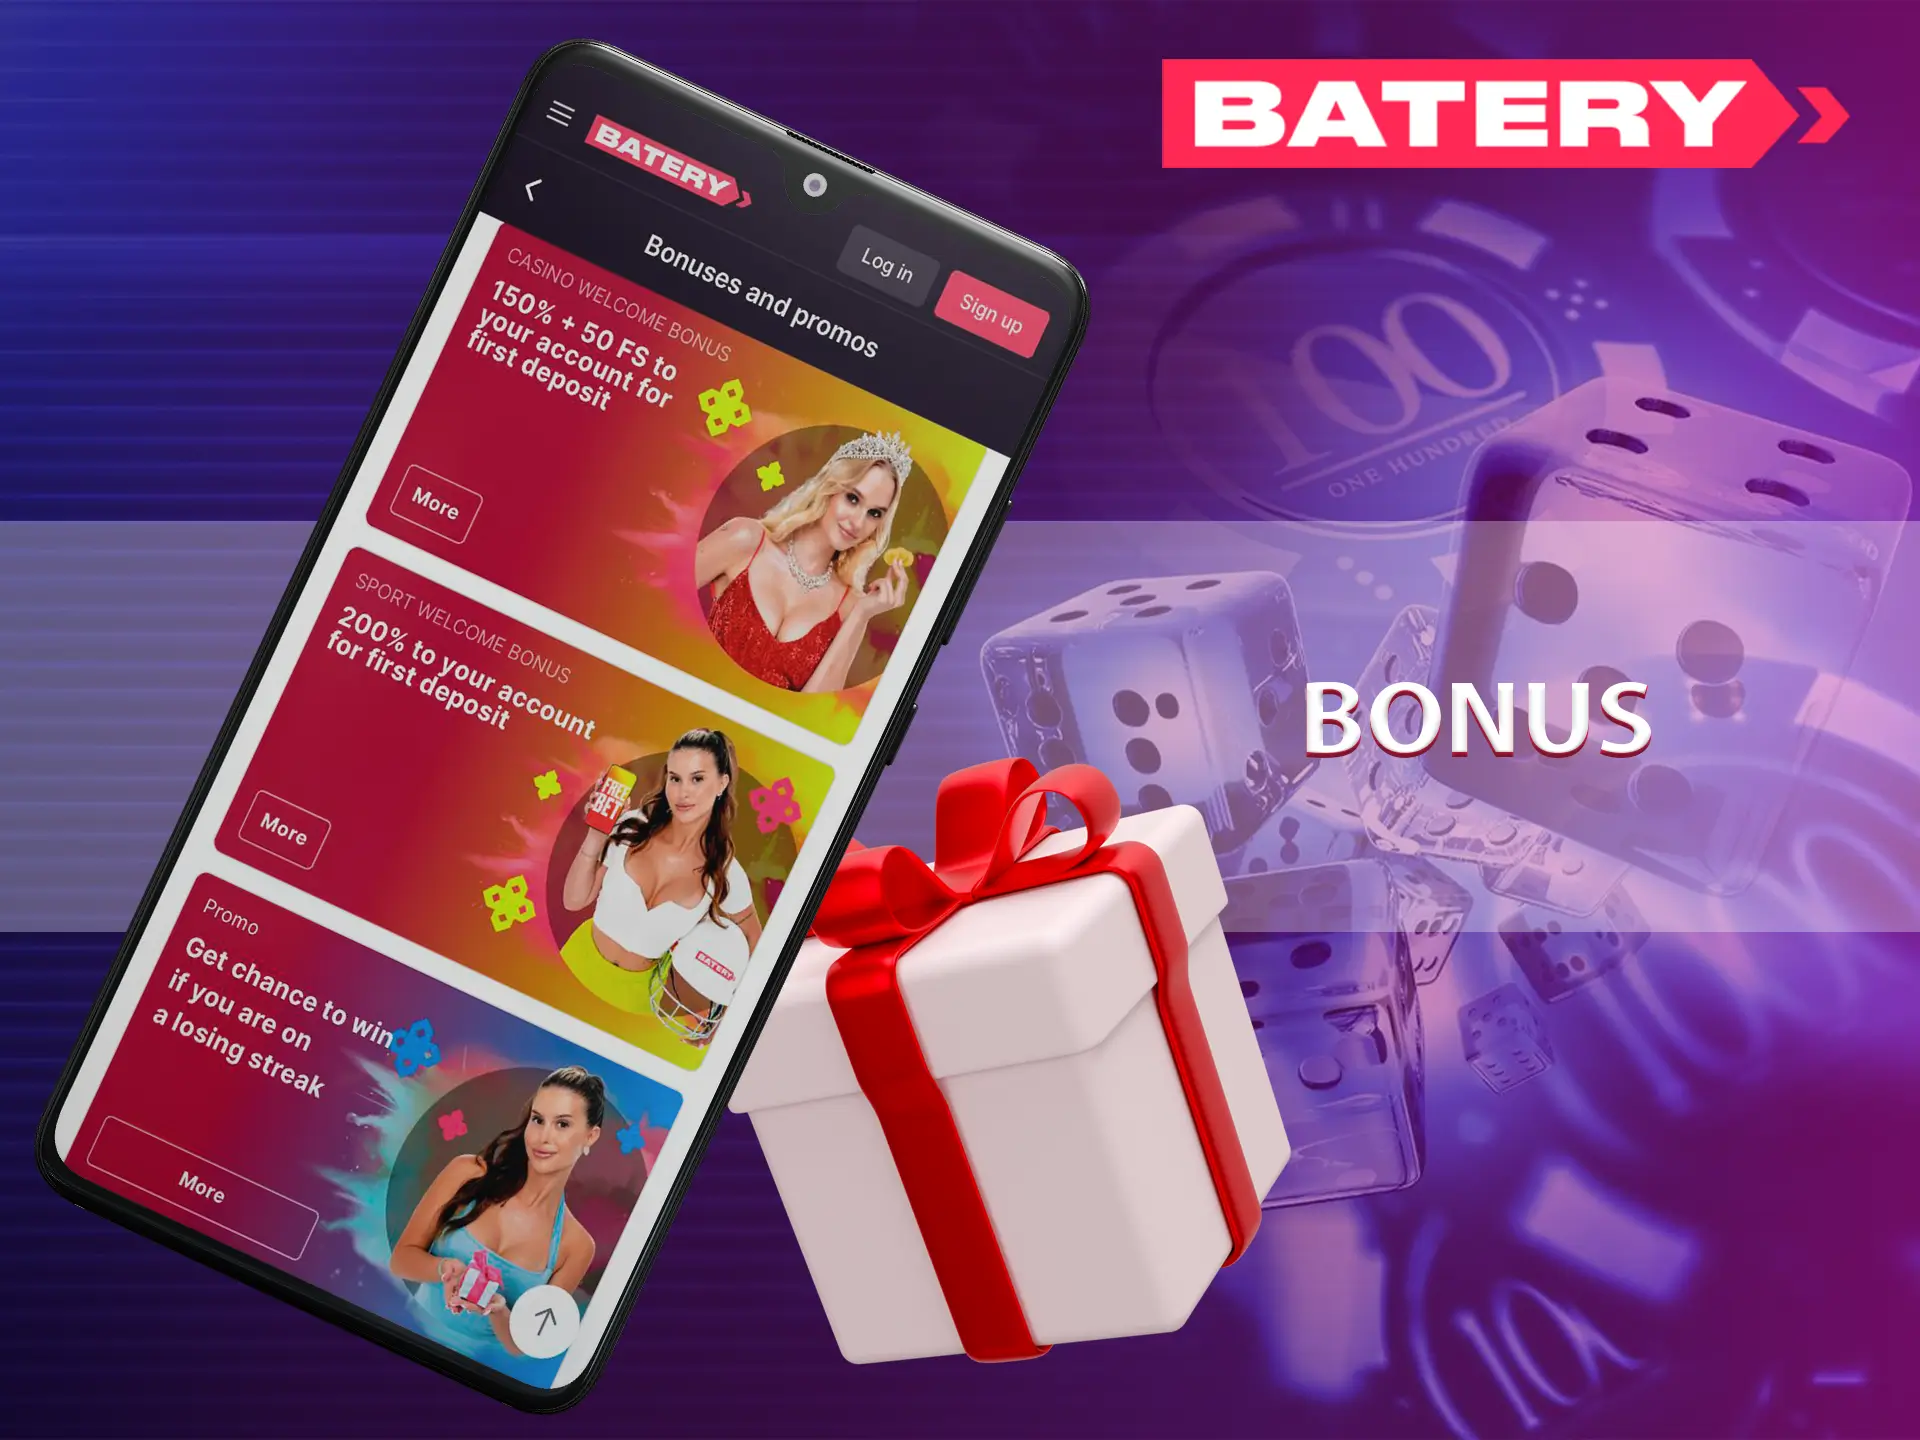 Take advantage of the welcome bonus and increase your level of play at Batery Casino.